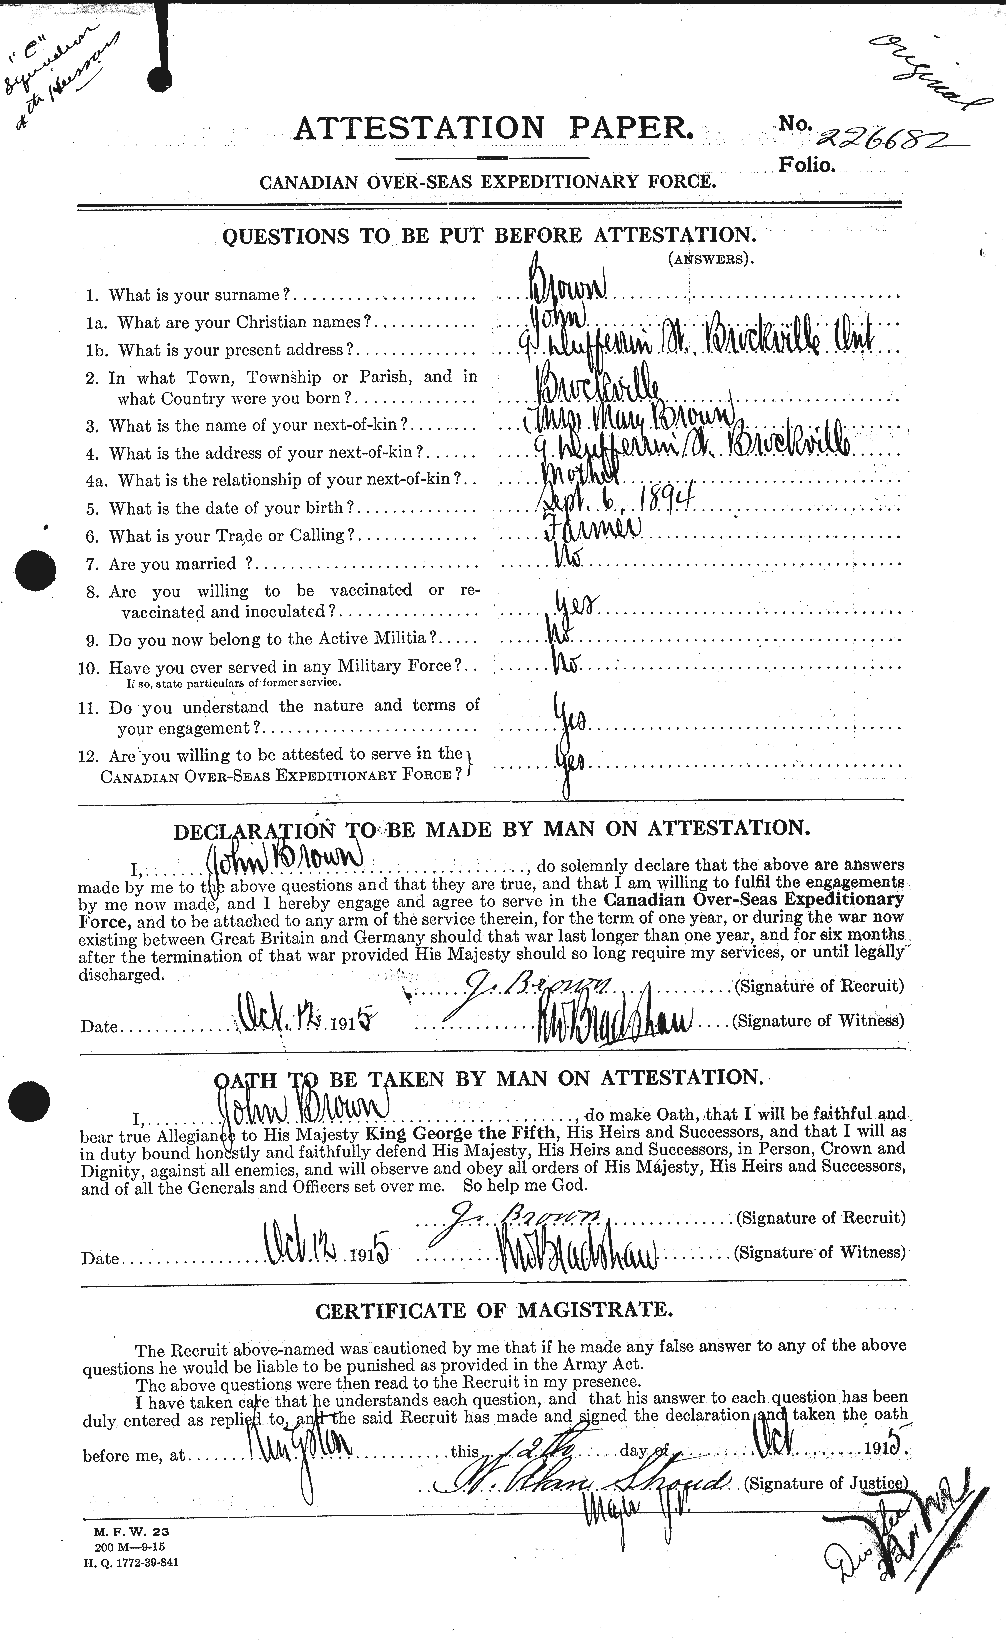 Personnel Records of the First World War - CEF 263918a